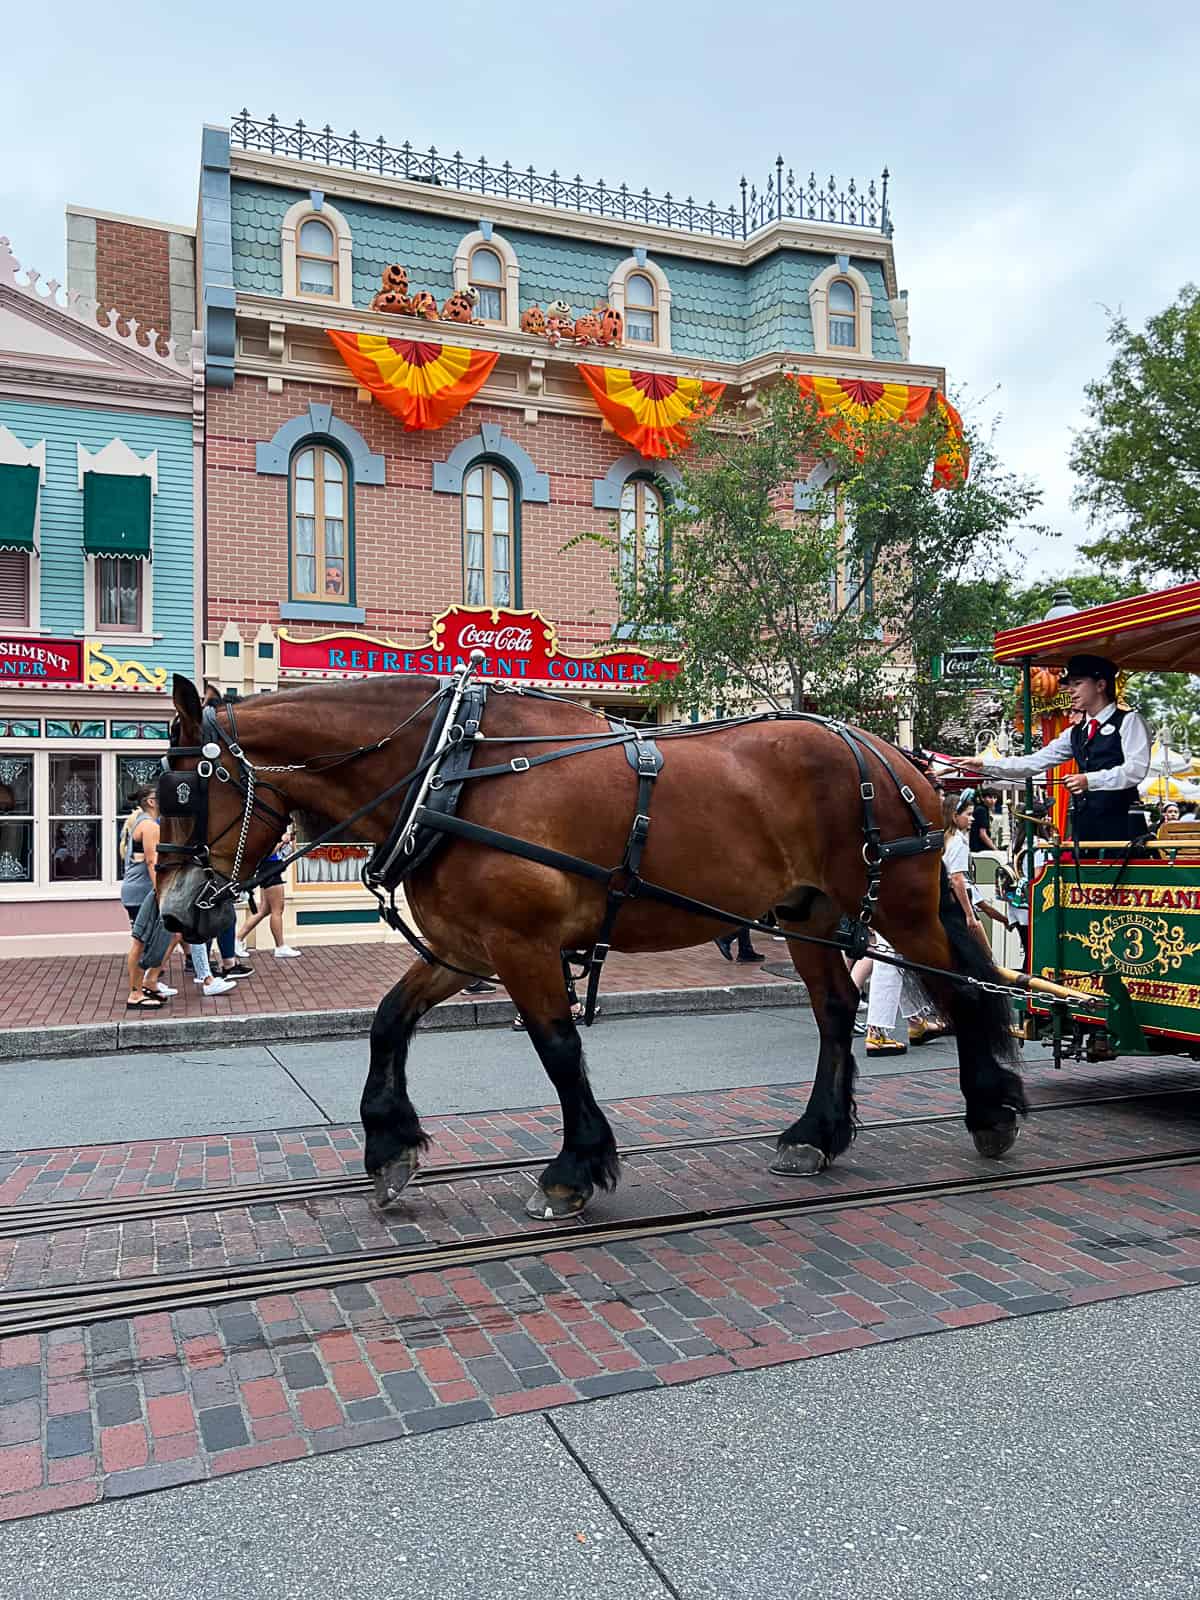 Disneyland View From Main Street USA with horse trolly